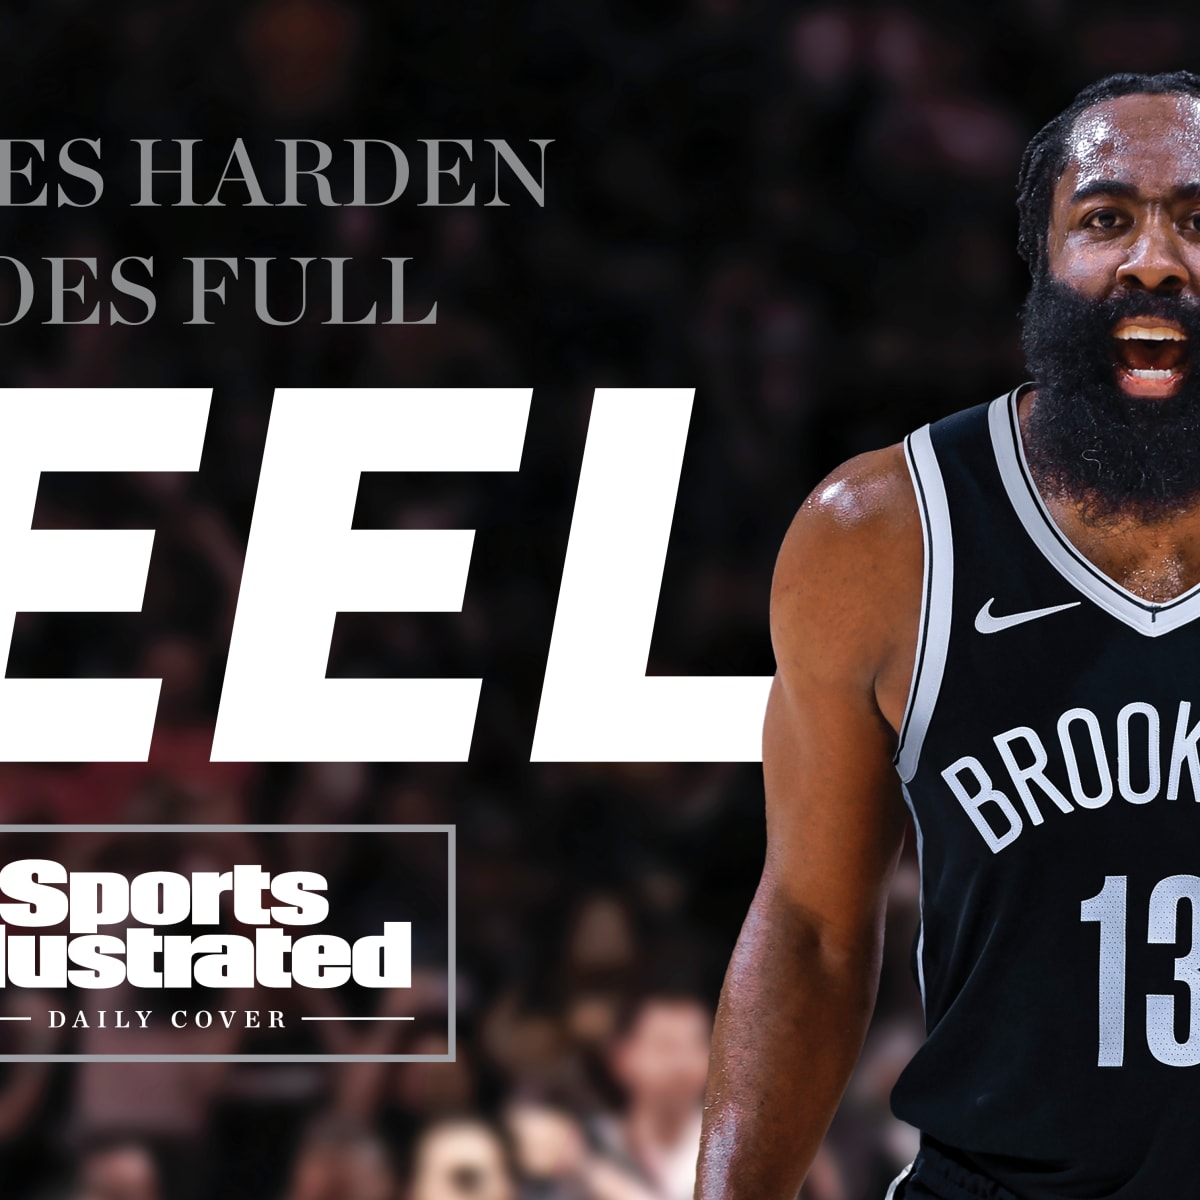 How Tall Is James Harden? News, Age, Awards, Injury & More 2022